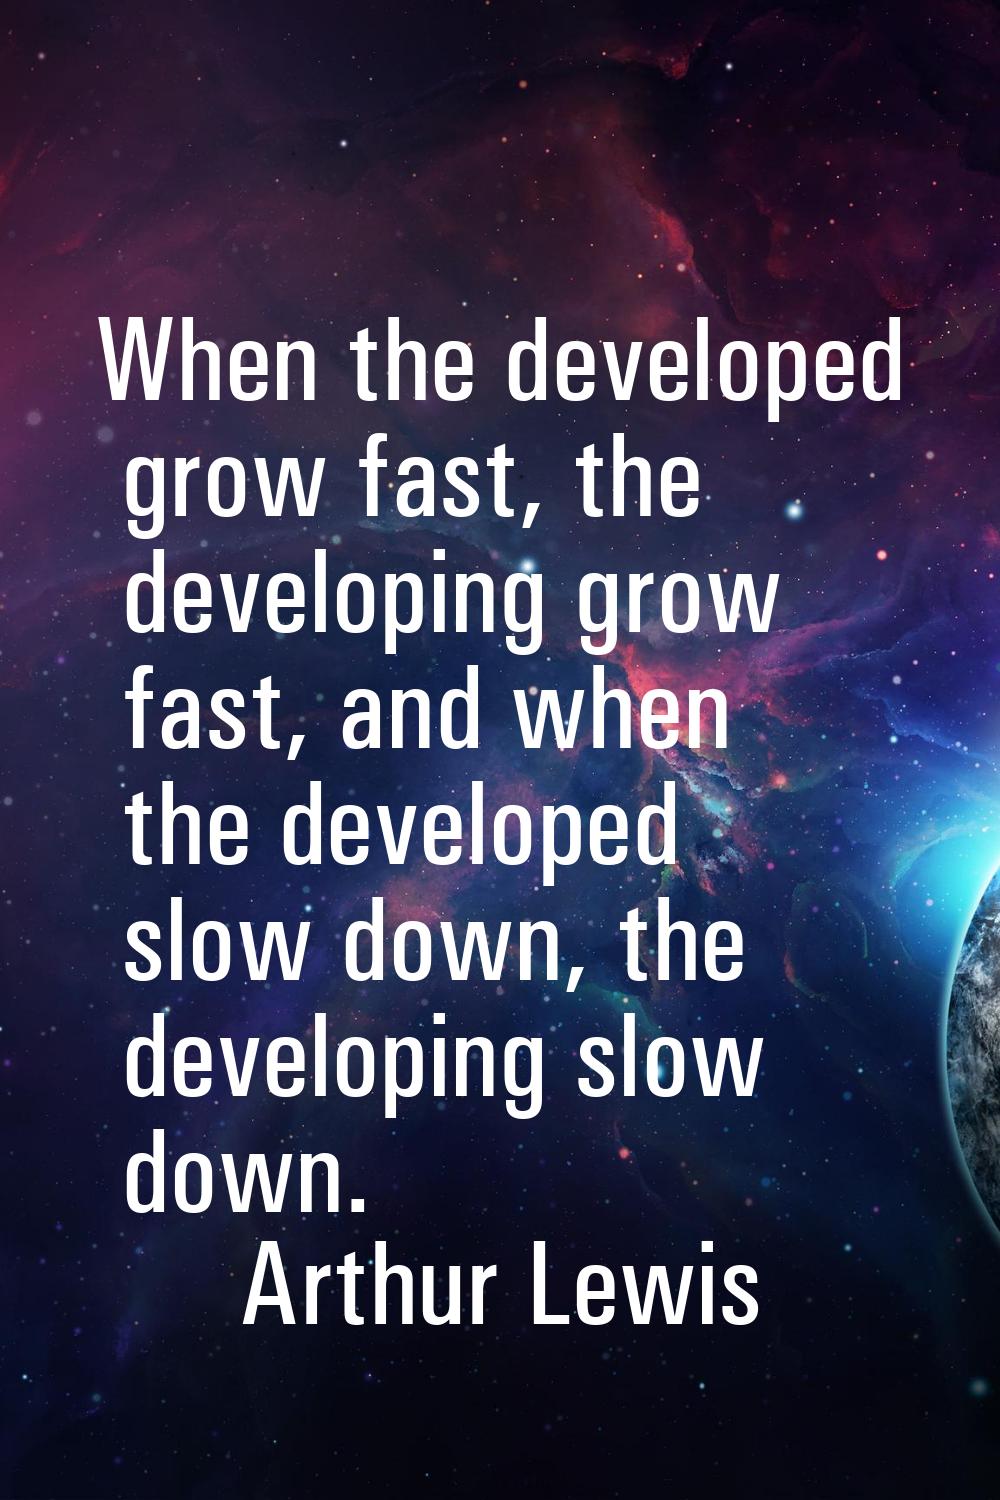 When the developed grow fast, the developing grow fast, and when the developed slow down, the devel